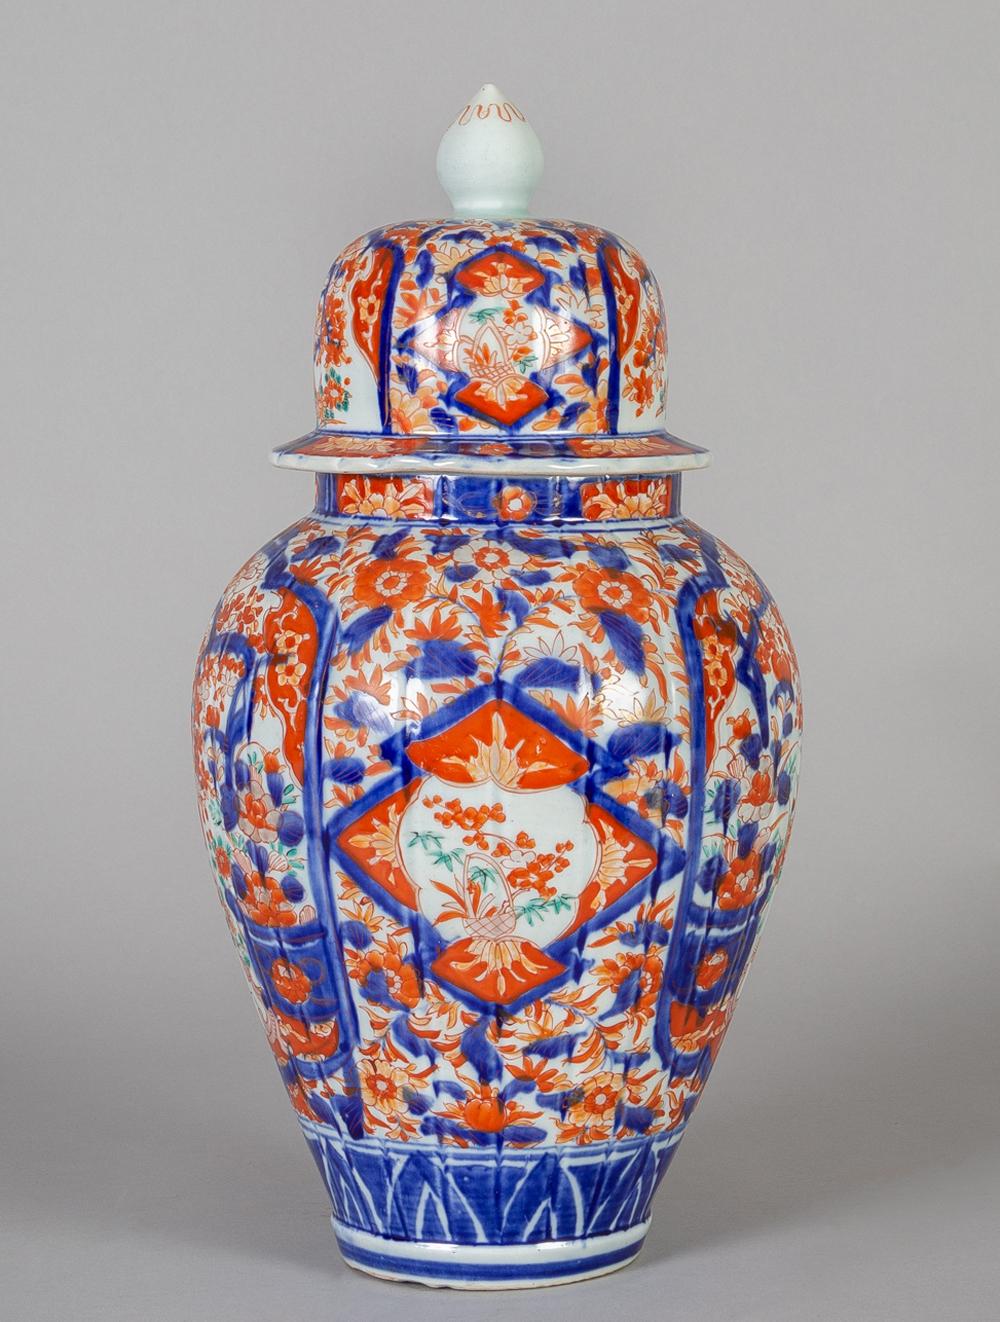 Large Japanese Imari lidded vase with ribbed body decorated with panels of flowering trees and a peacock-like bird perched on a branch, in polychrome colors of iron red and blue, the base decorated with a bold geometric pattern.